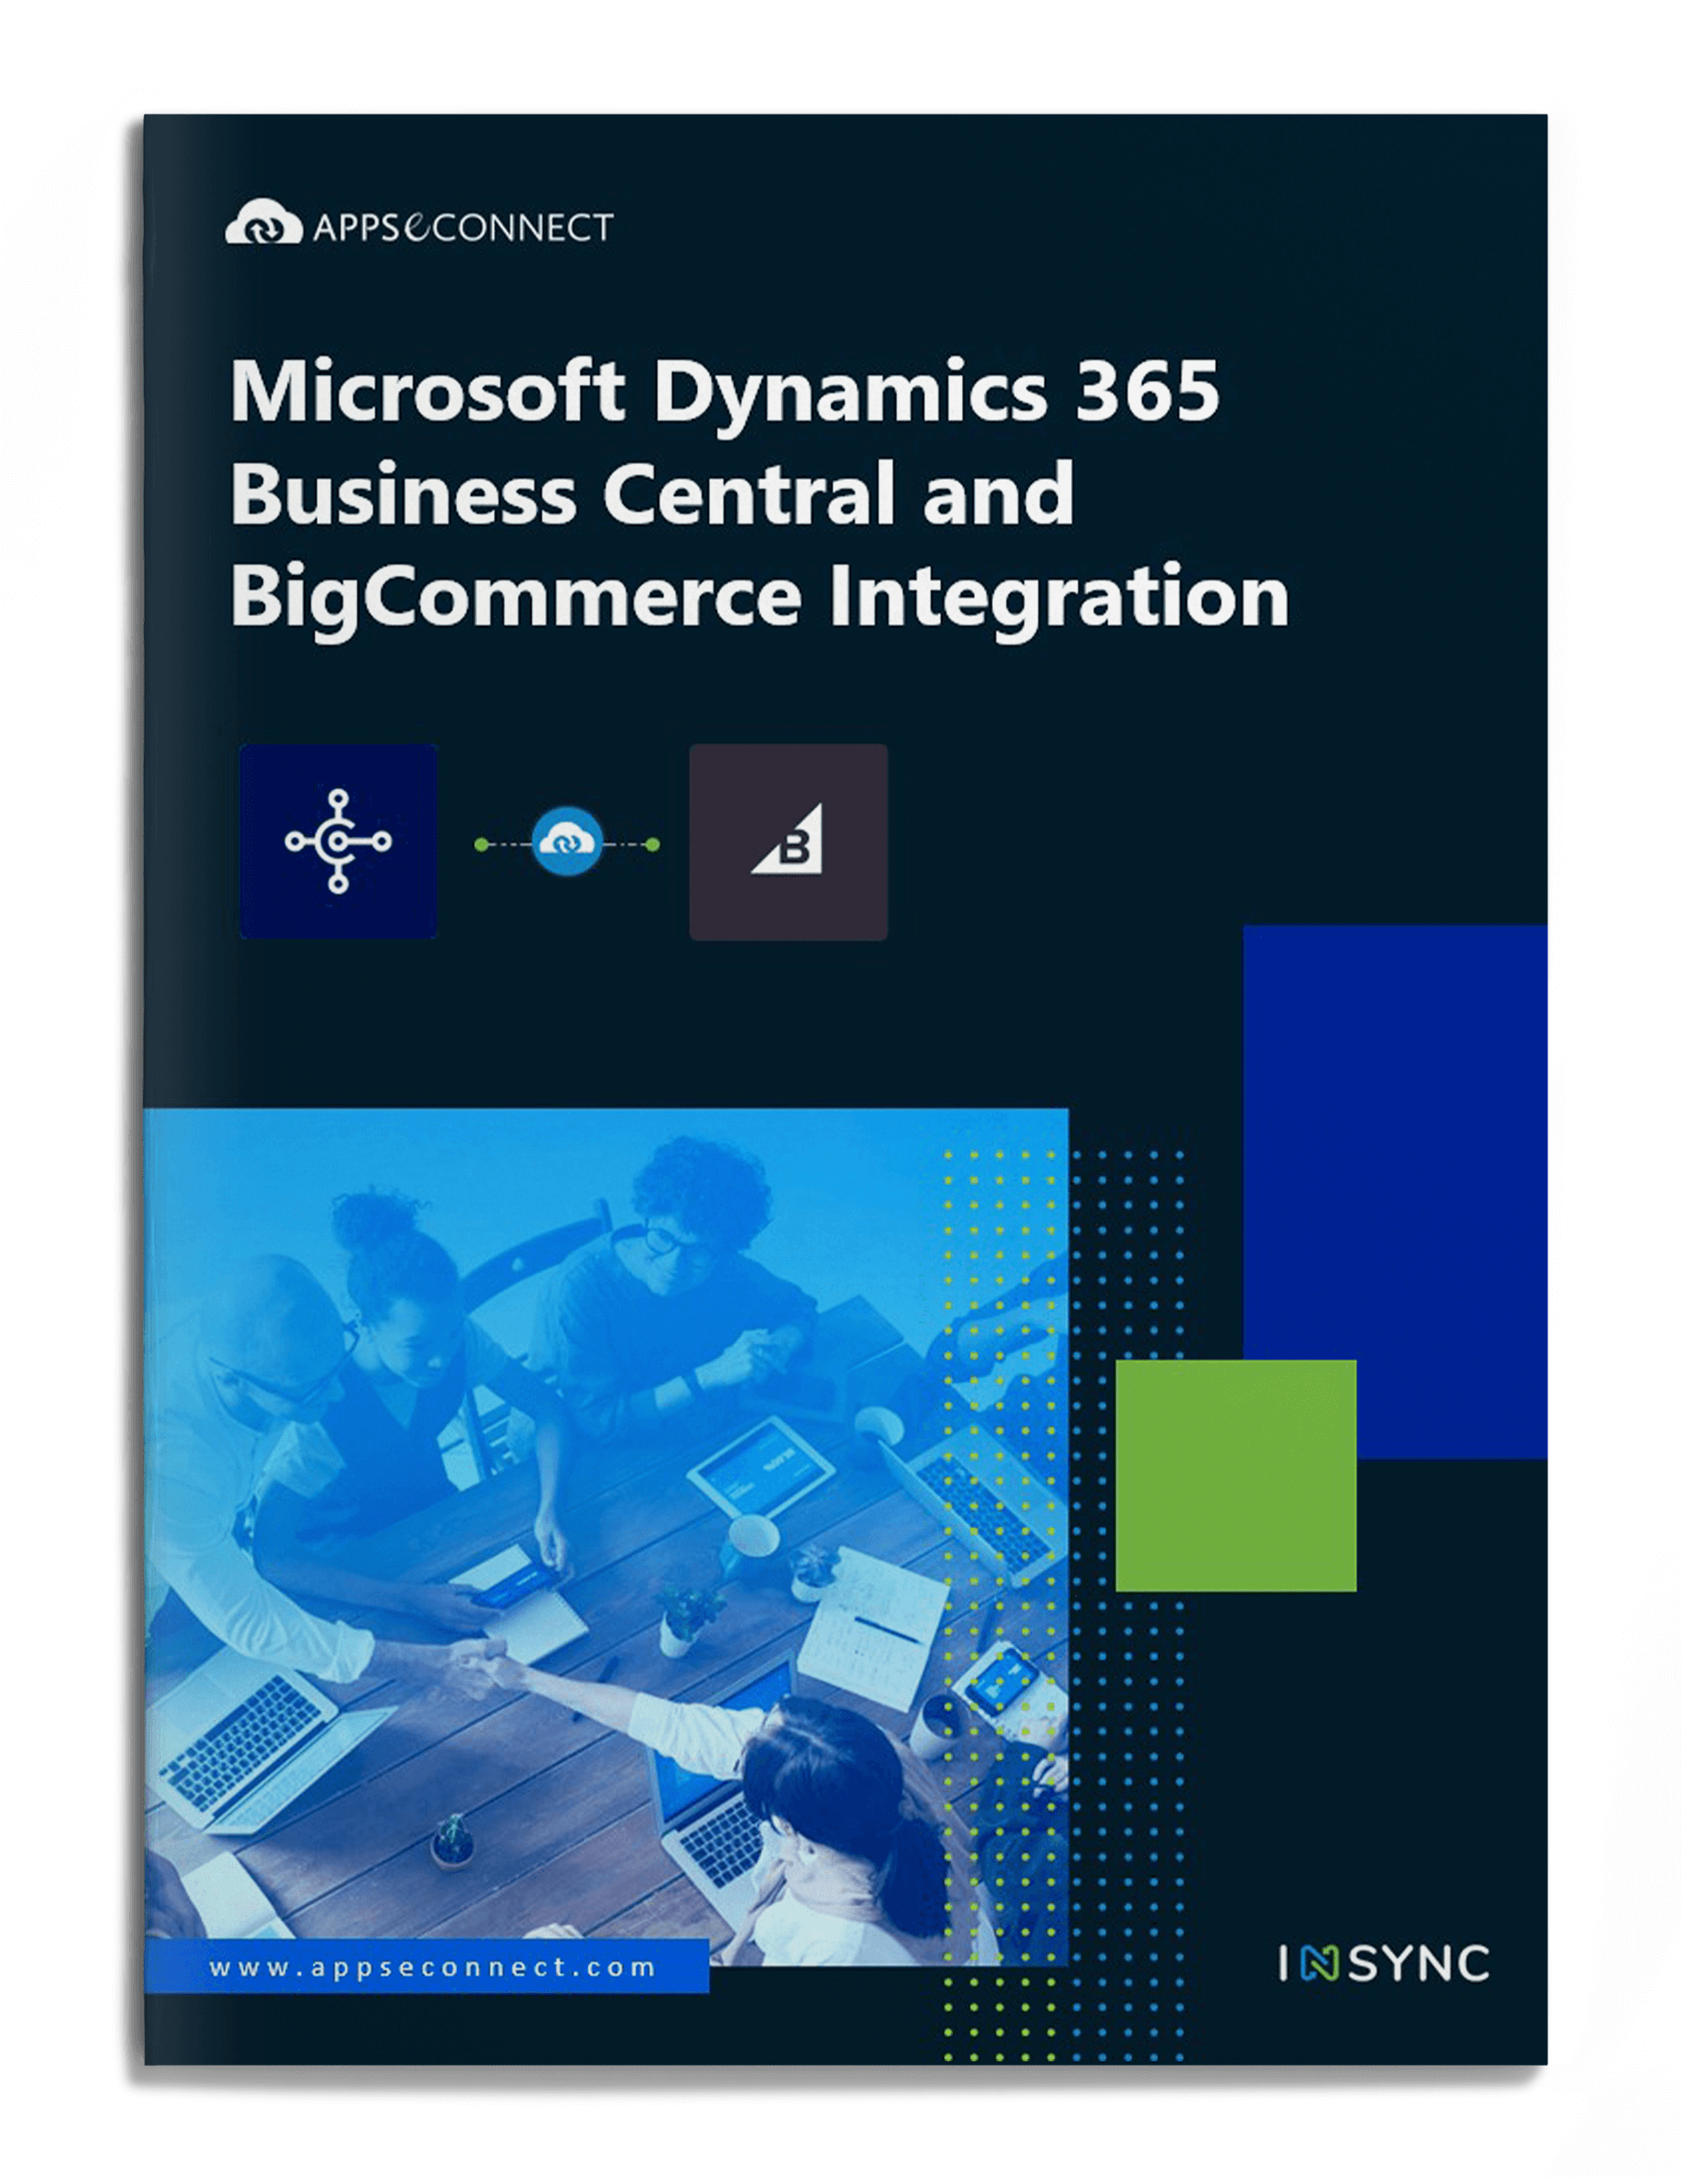 Microsoft Dynamics 365 Business Central and BigCommerce brochure cover